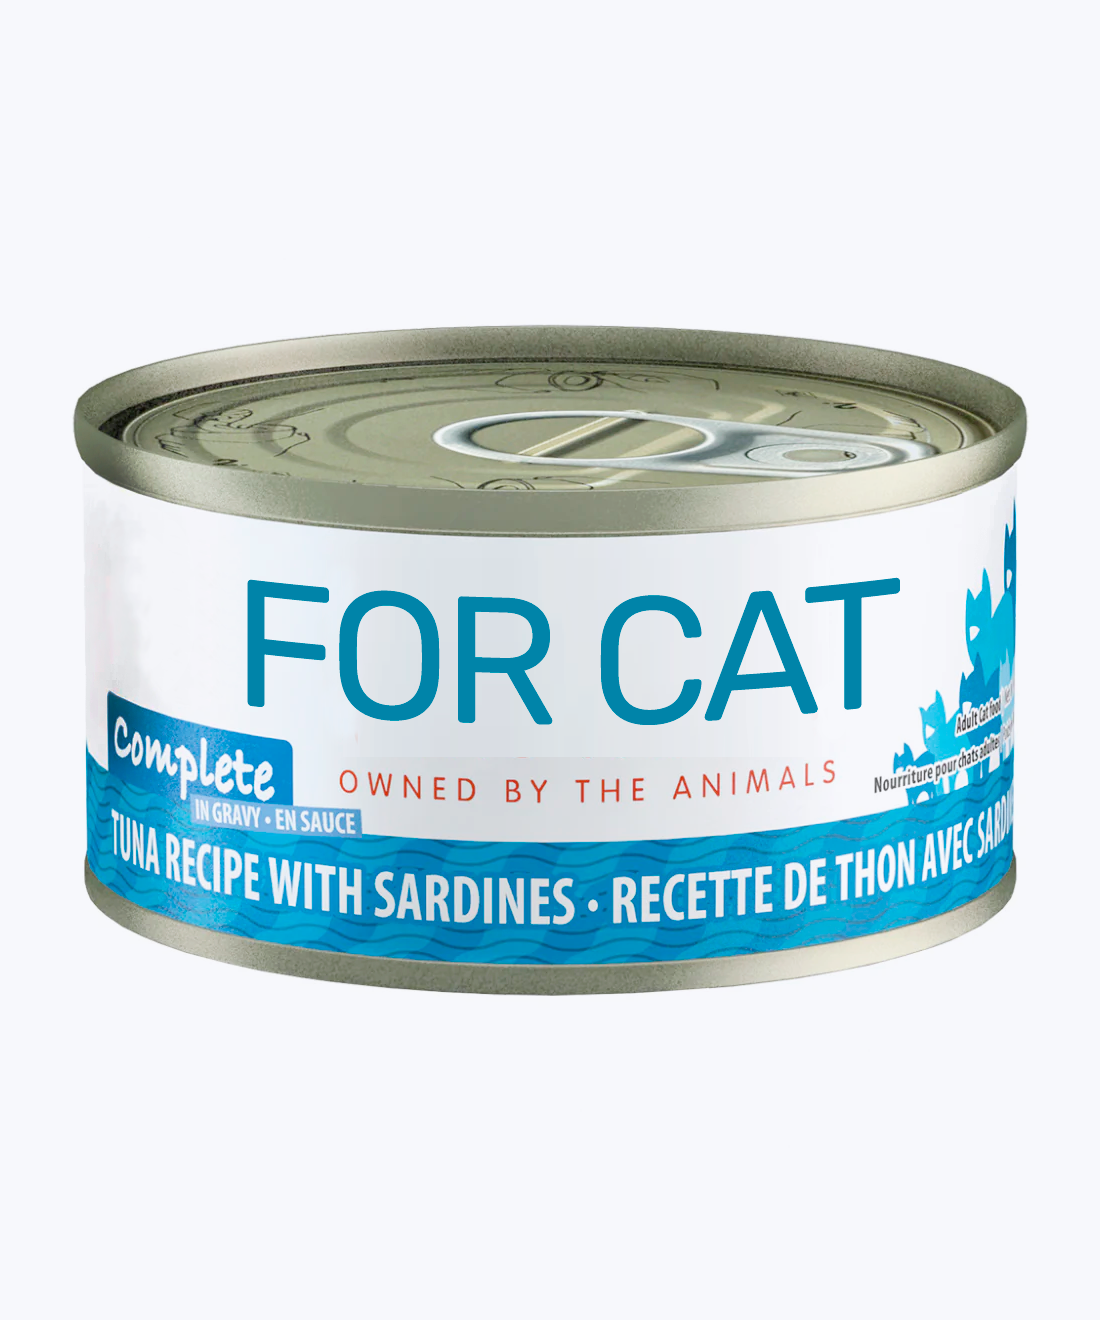 Canned cat food